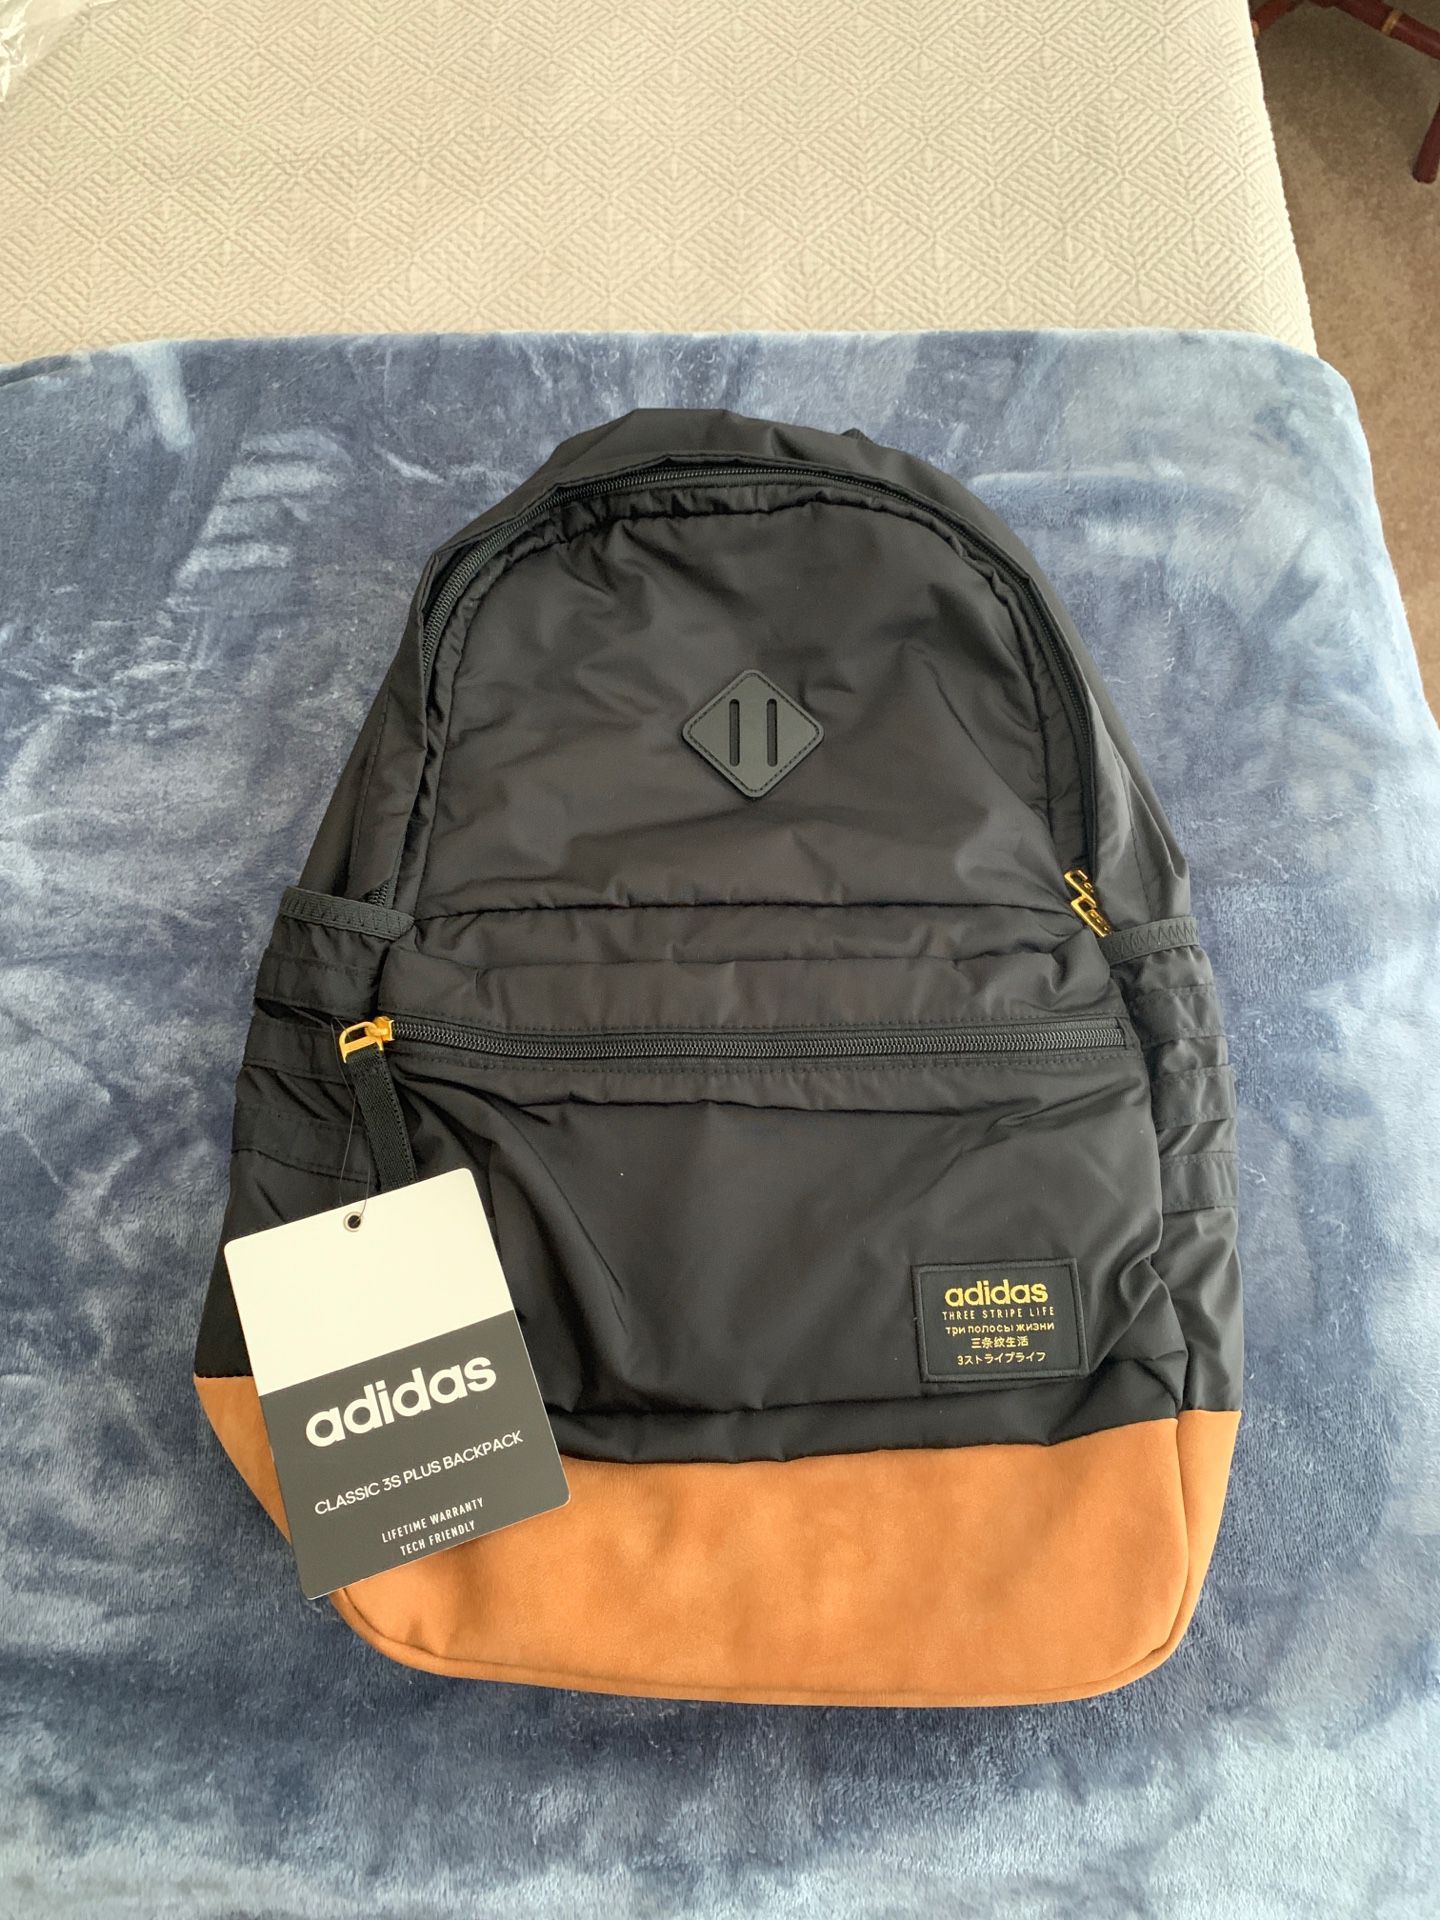 Adidas - Classic 3s Plus Backpack (Brand New!)